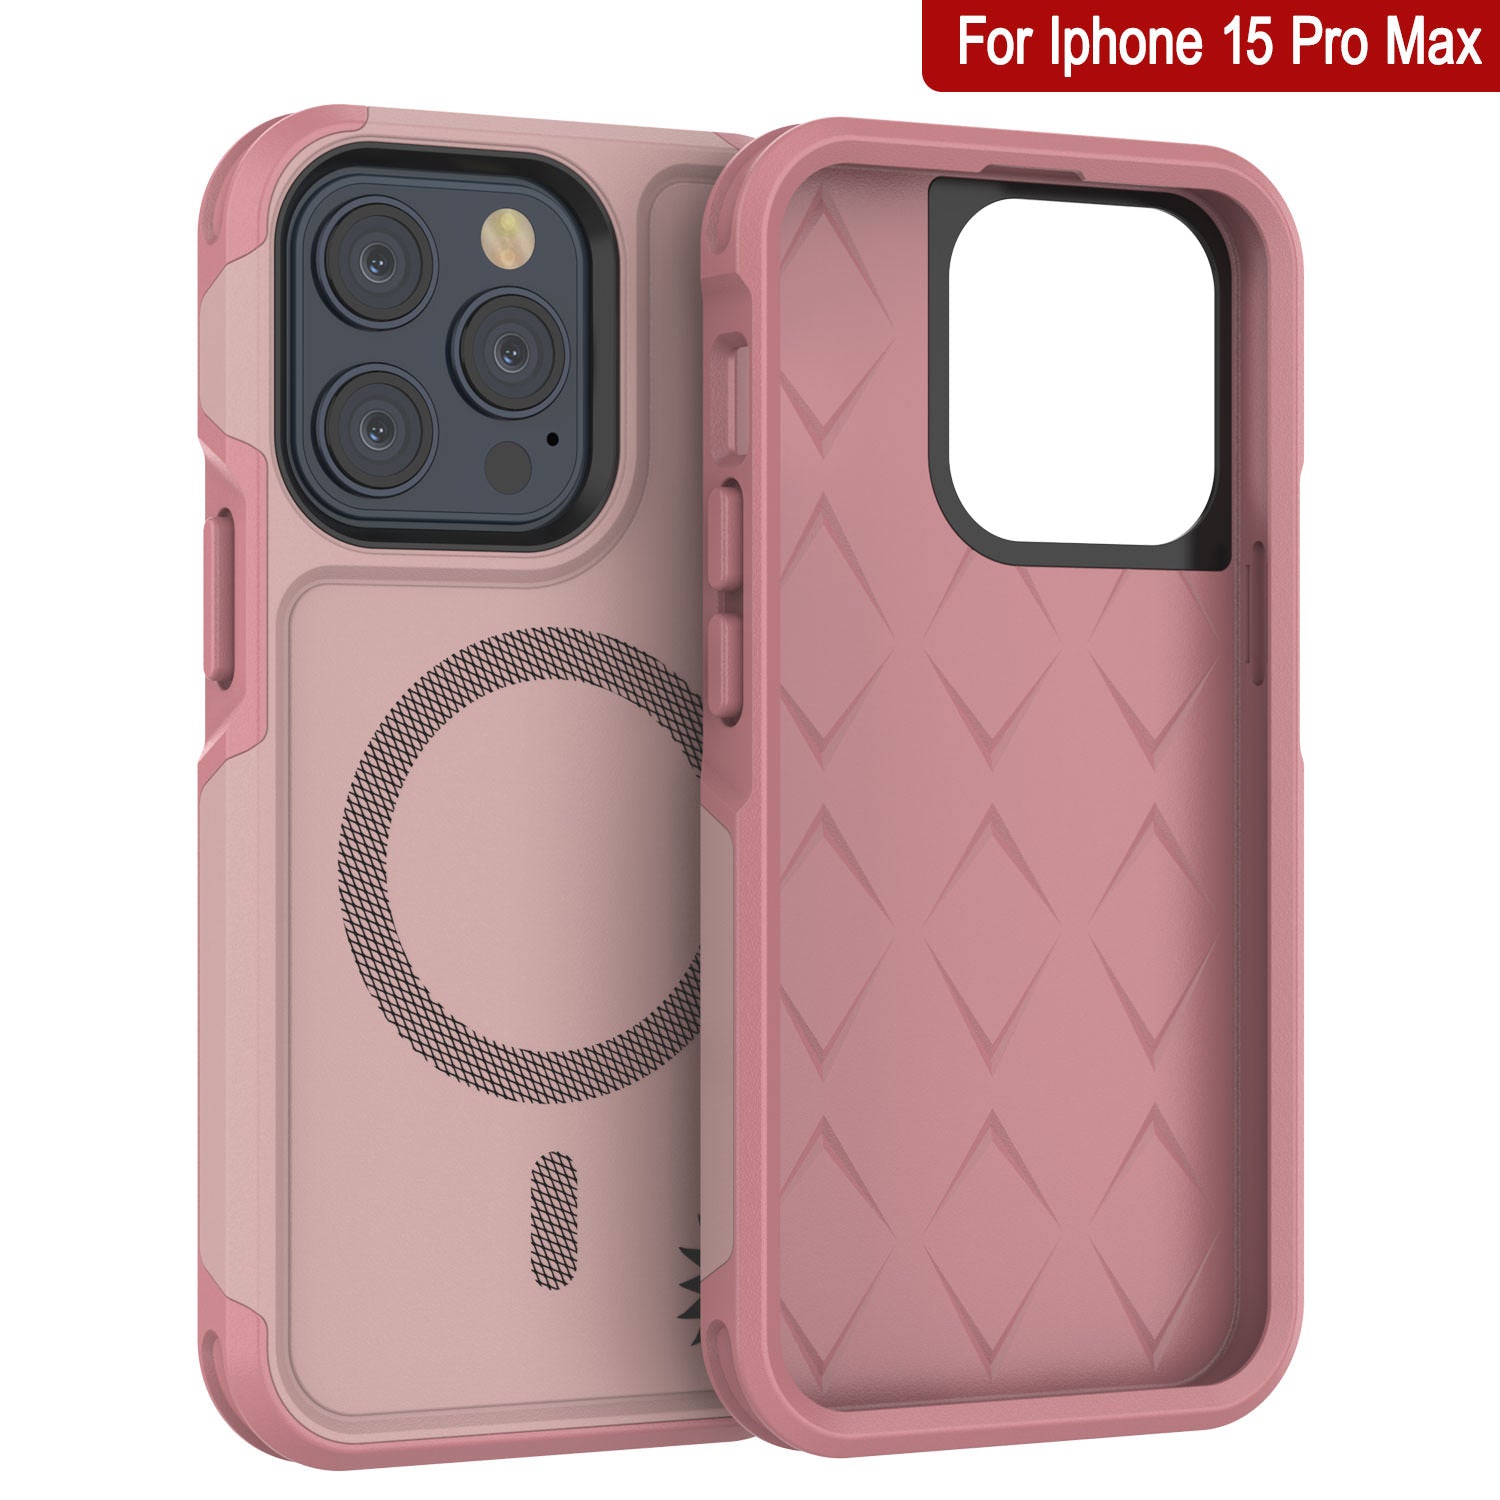 PunkCase iPhone 15 Pro Max Case, [Spartan 2.0 Series] Clear Rugged Heavy Duty Cover W/Built in Screen Protector [pink]